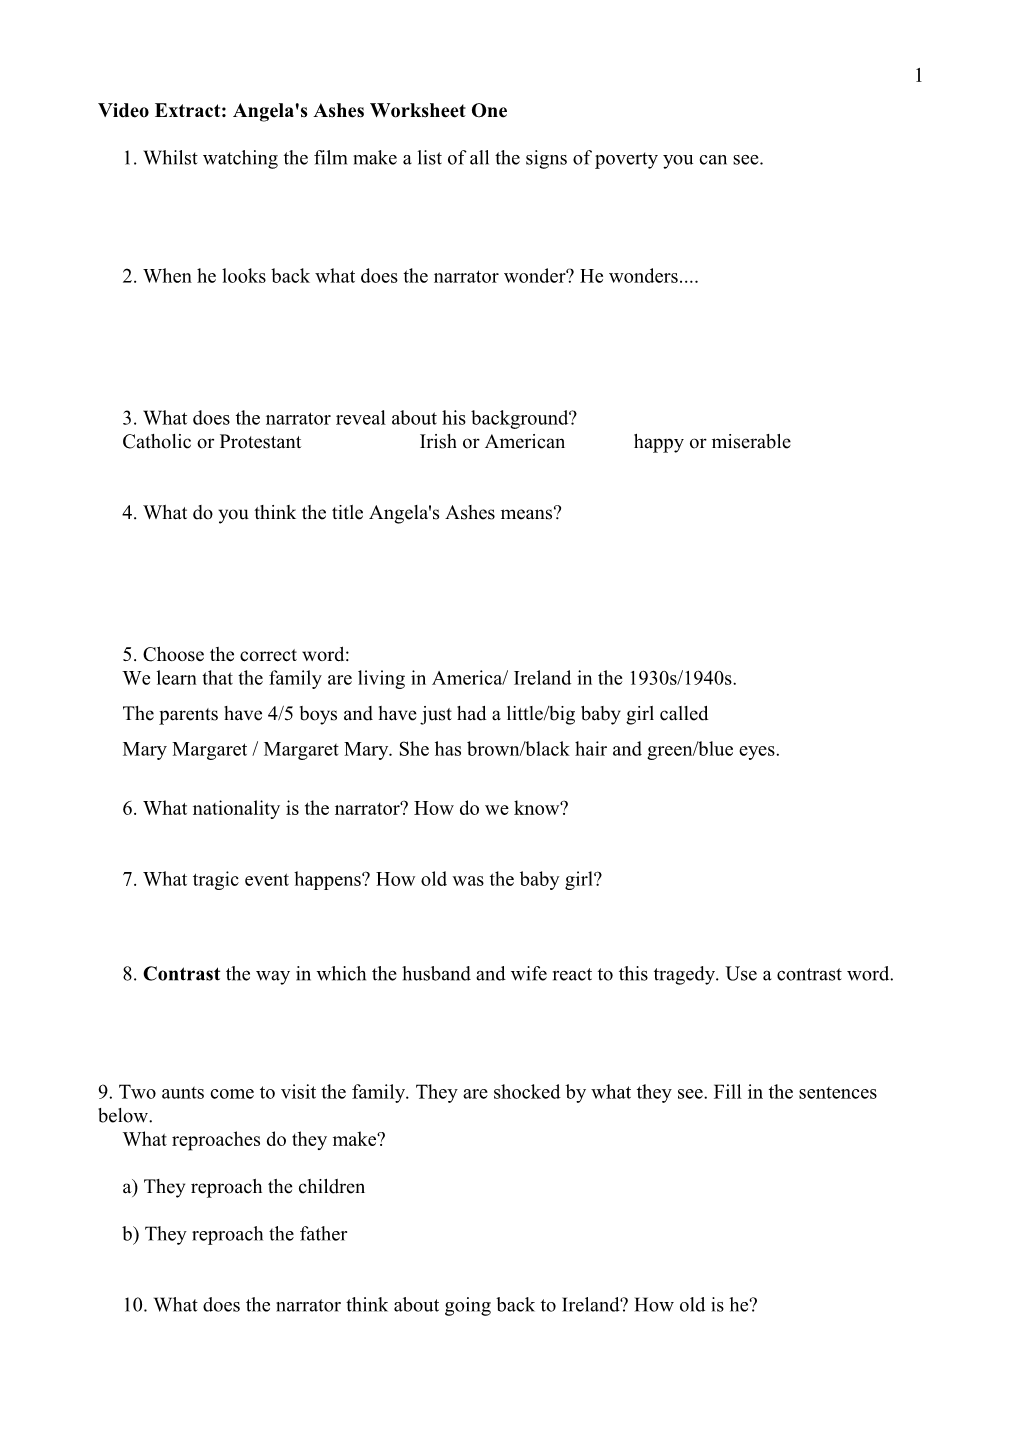 Video Extract: Angela's Ashes Worksheet One